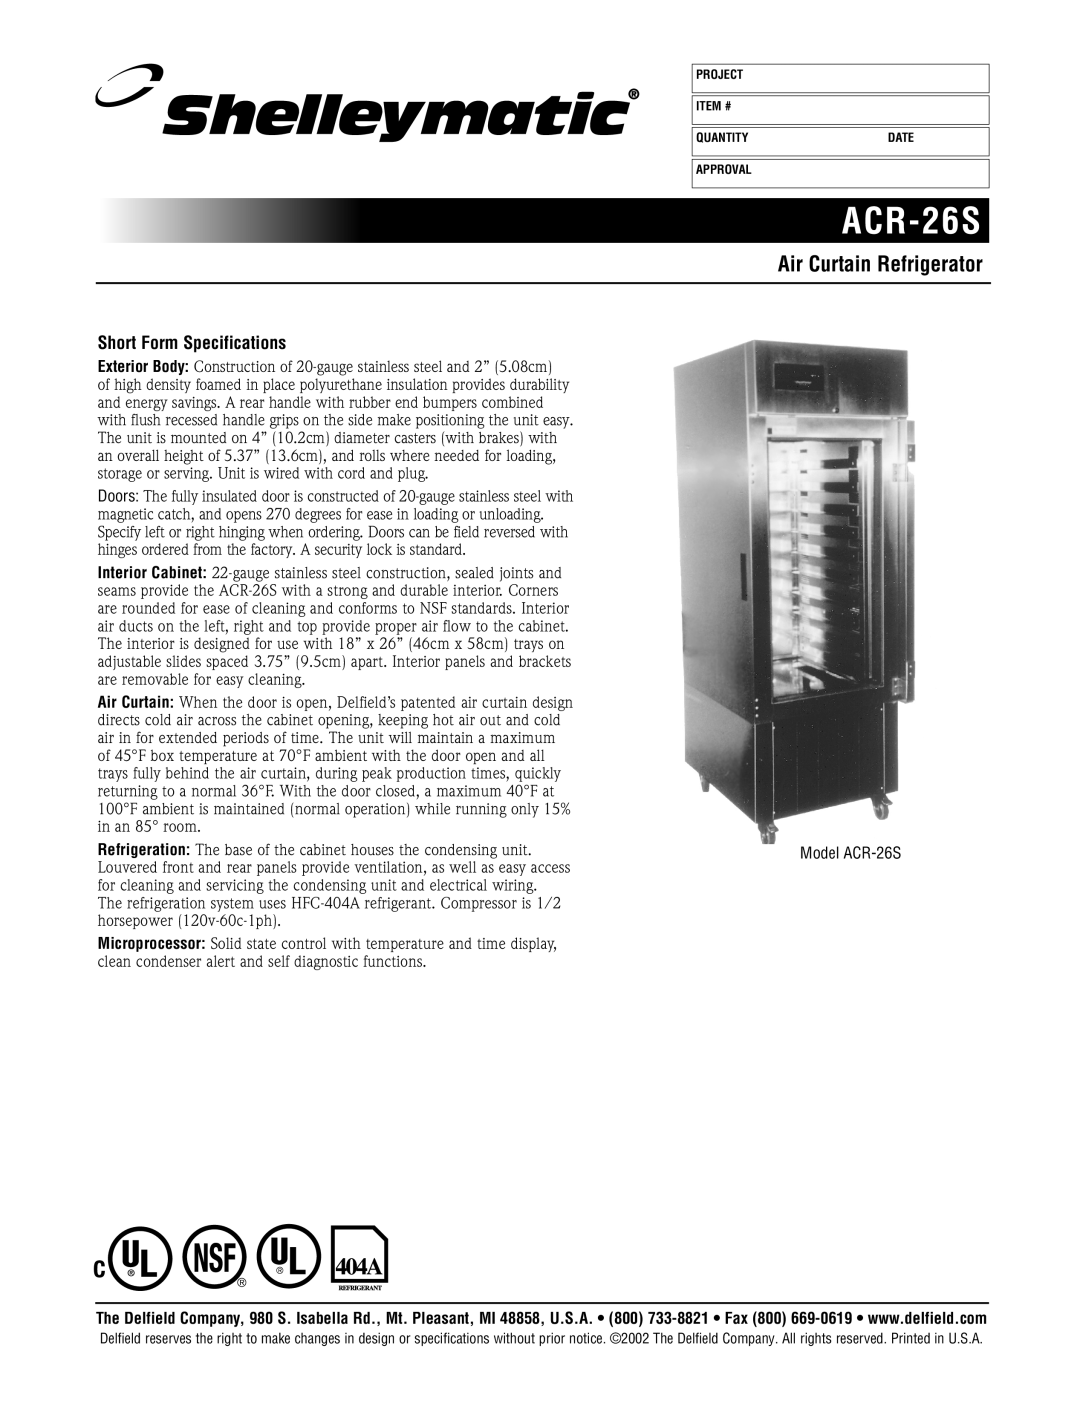 Delfield ACR-26S specifications Air Curtain Refrigerator, Short Form Specifications 